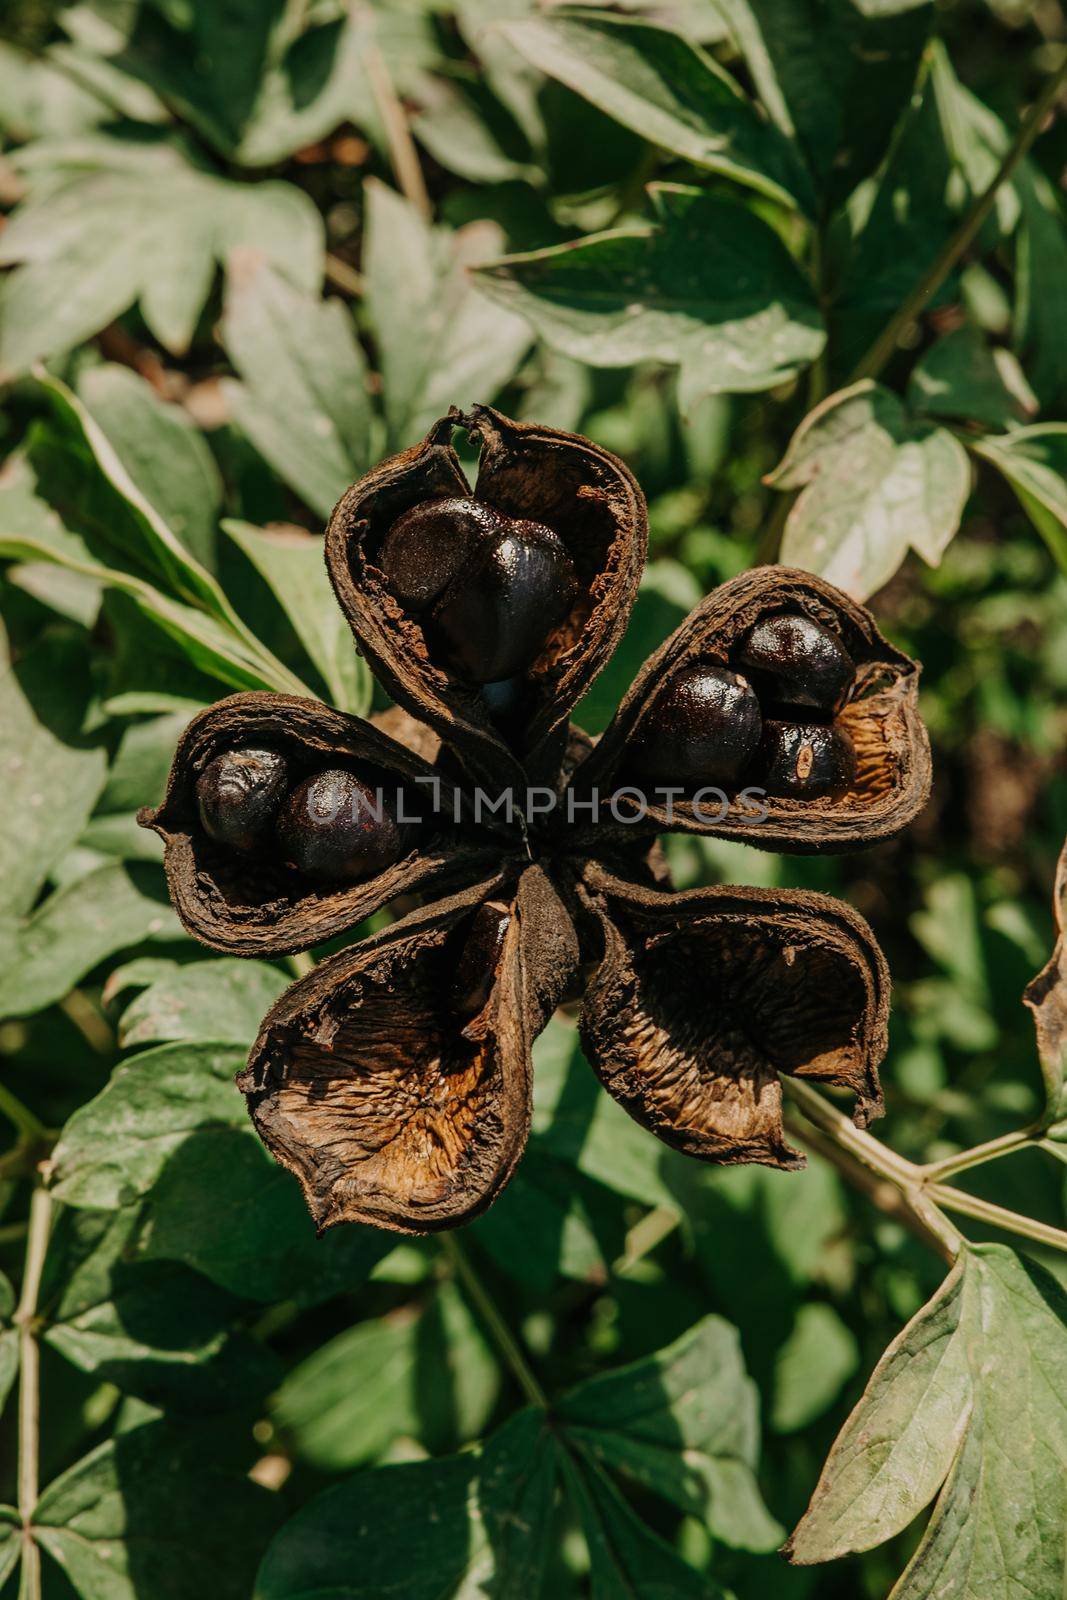 Seed head of tree peony in autumn. Paeonia suffruticosa growing in countryside garden. High quality photo